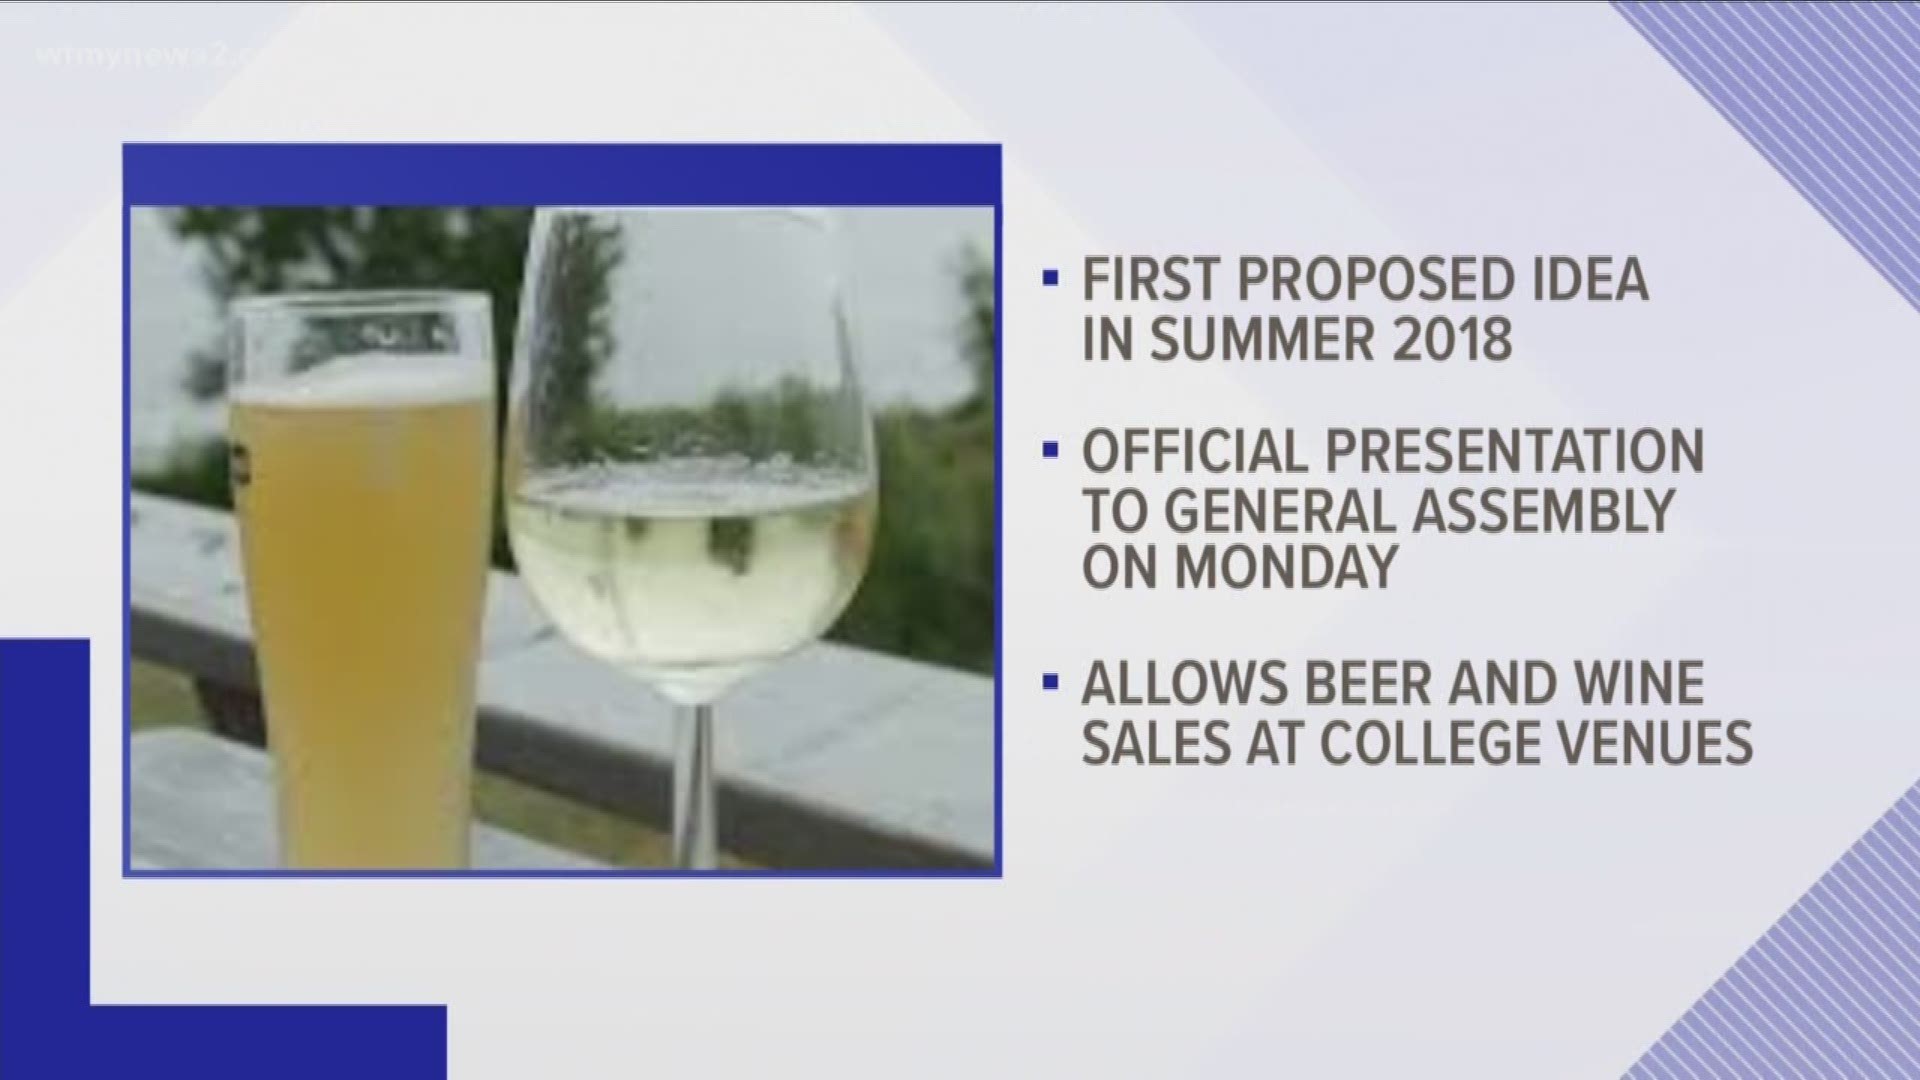 Some Lawmakers want universities to be able to sell beer and wine.